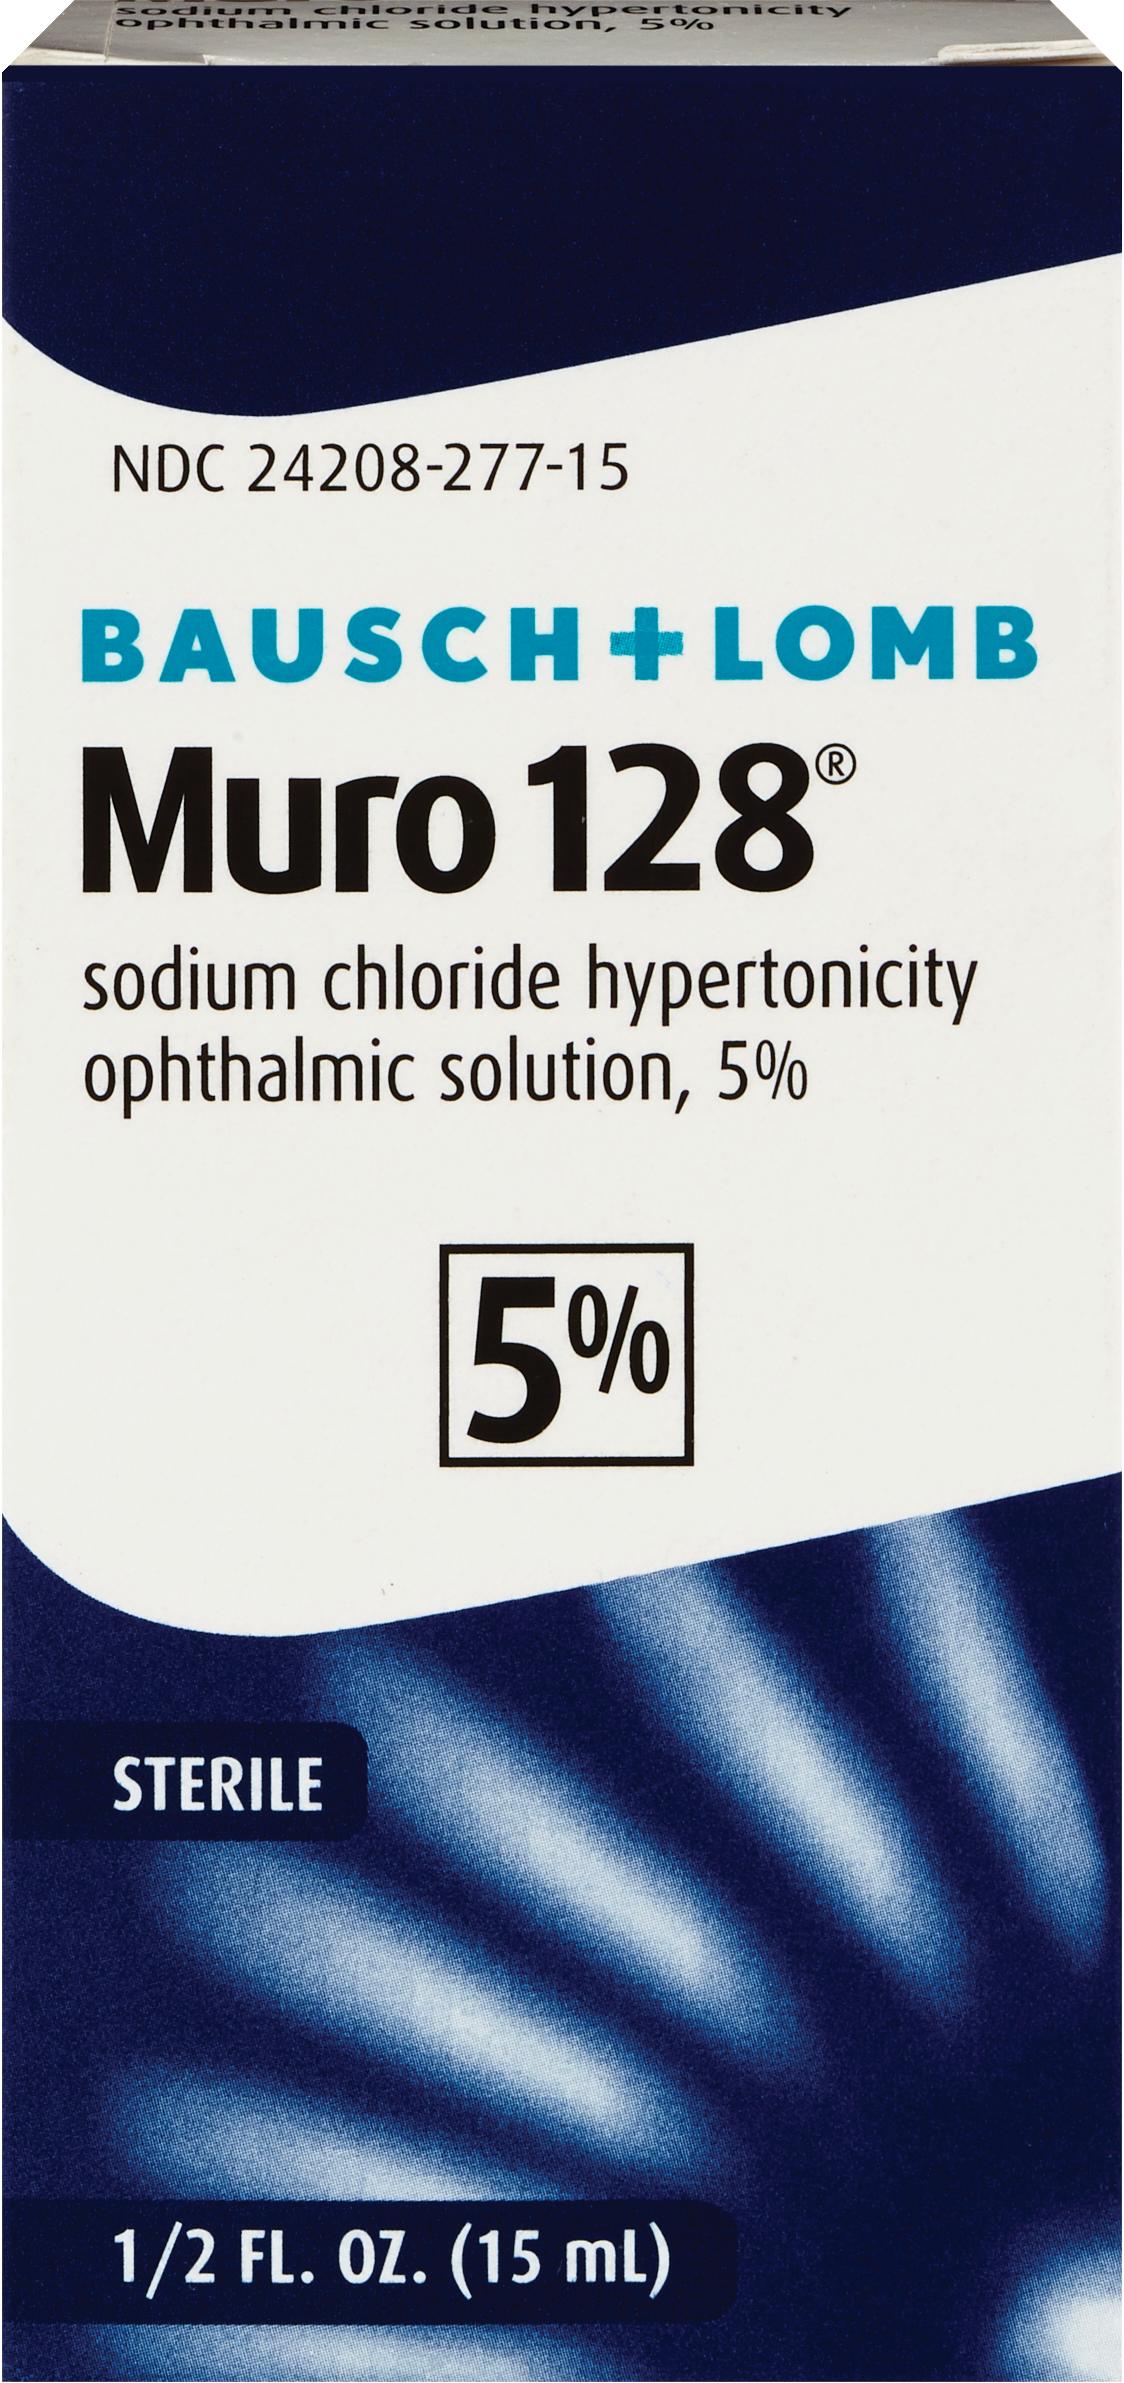 Bausch & Lomb Muro 128 Sterile Ophthalmic Solution, 5%